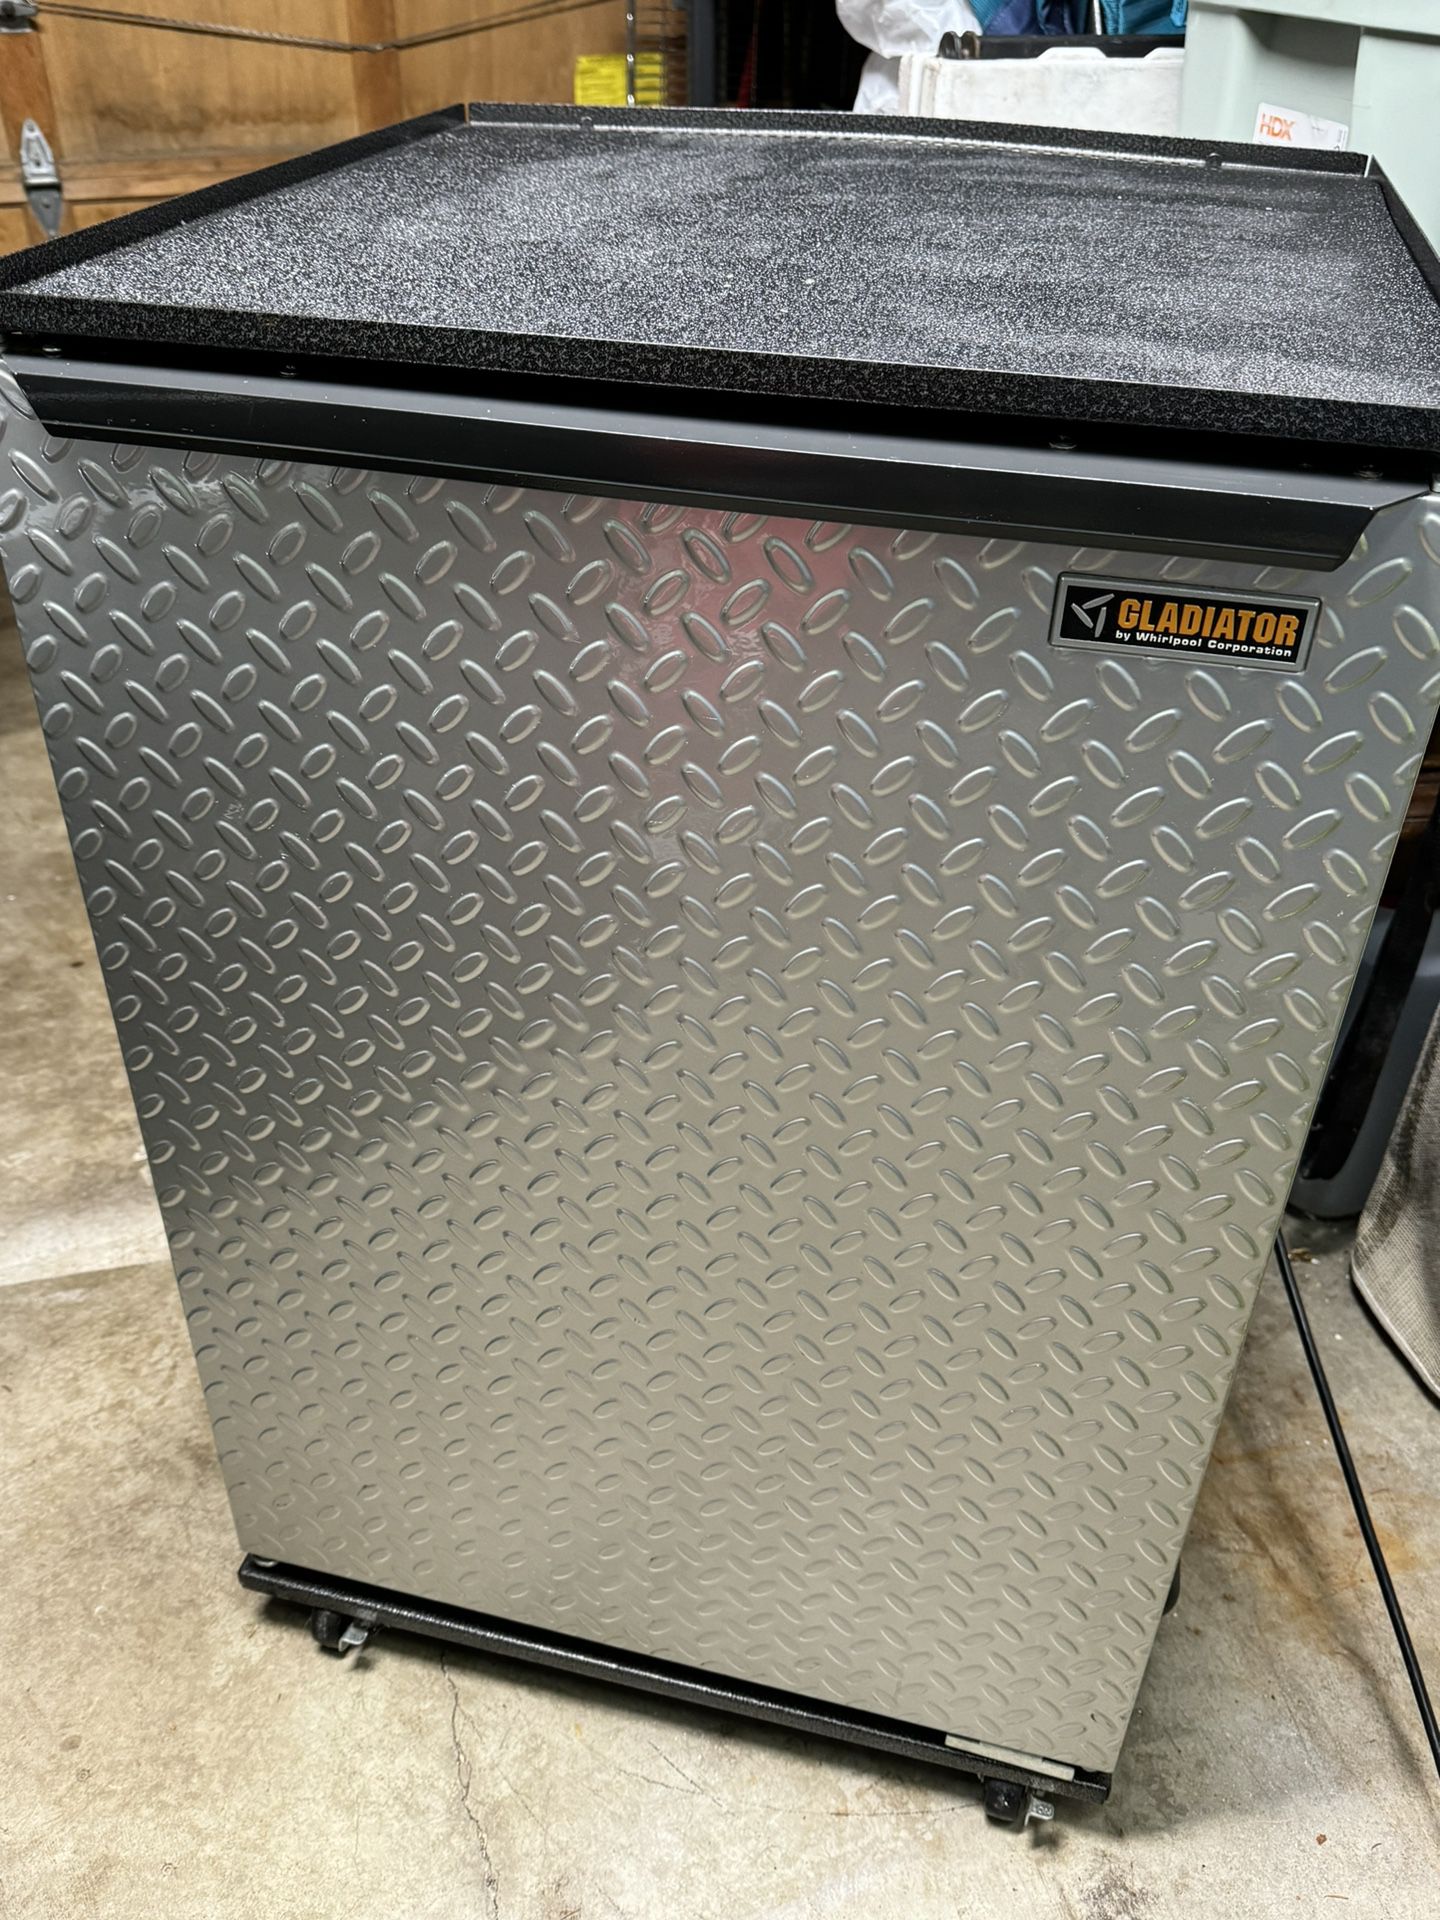 Gladiator Mini Fridge by Whirlpool - CAN DELIVER 